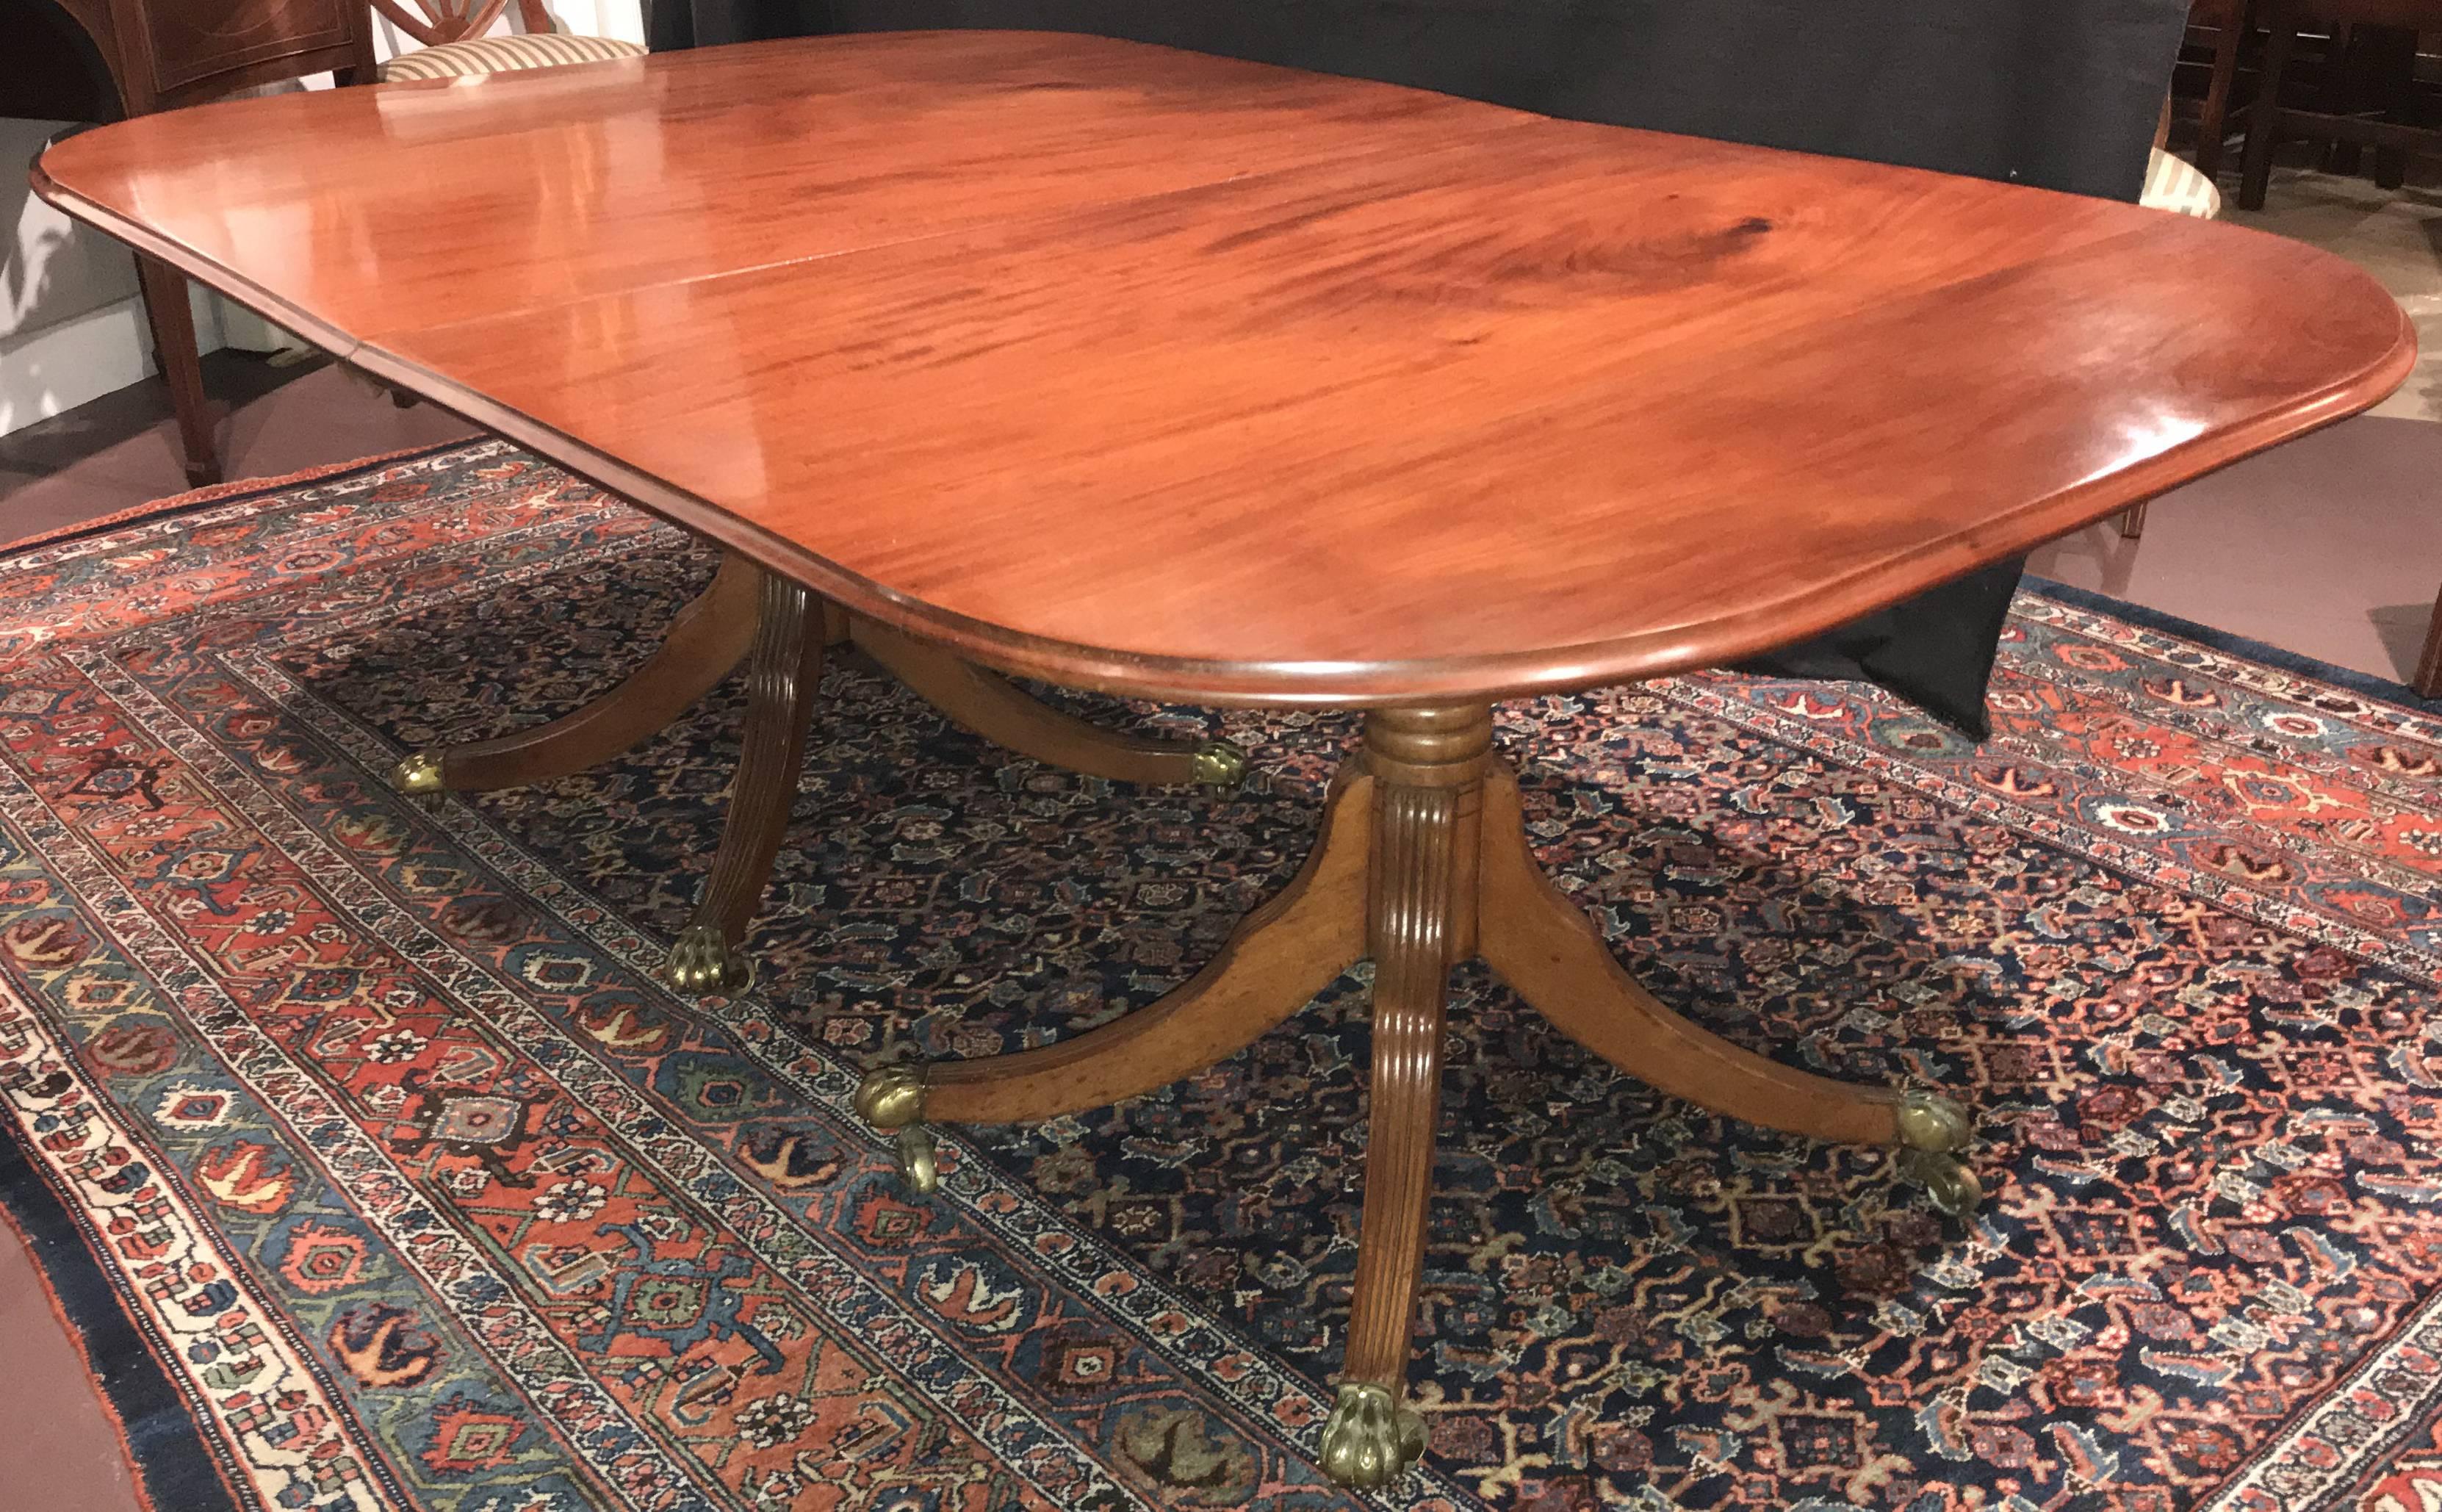 A splendid 19th century double pedestal dining table in mahogany with molded edge, and nicely turned pedestals with reeded downswept legs, terminating with brass paw foot casters, and includes one large 32 inch finished leaf of a slightly different